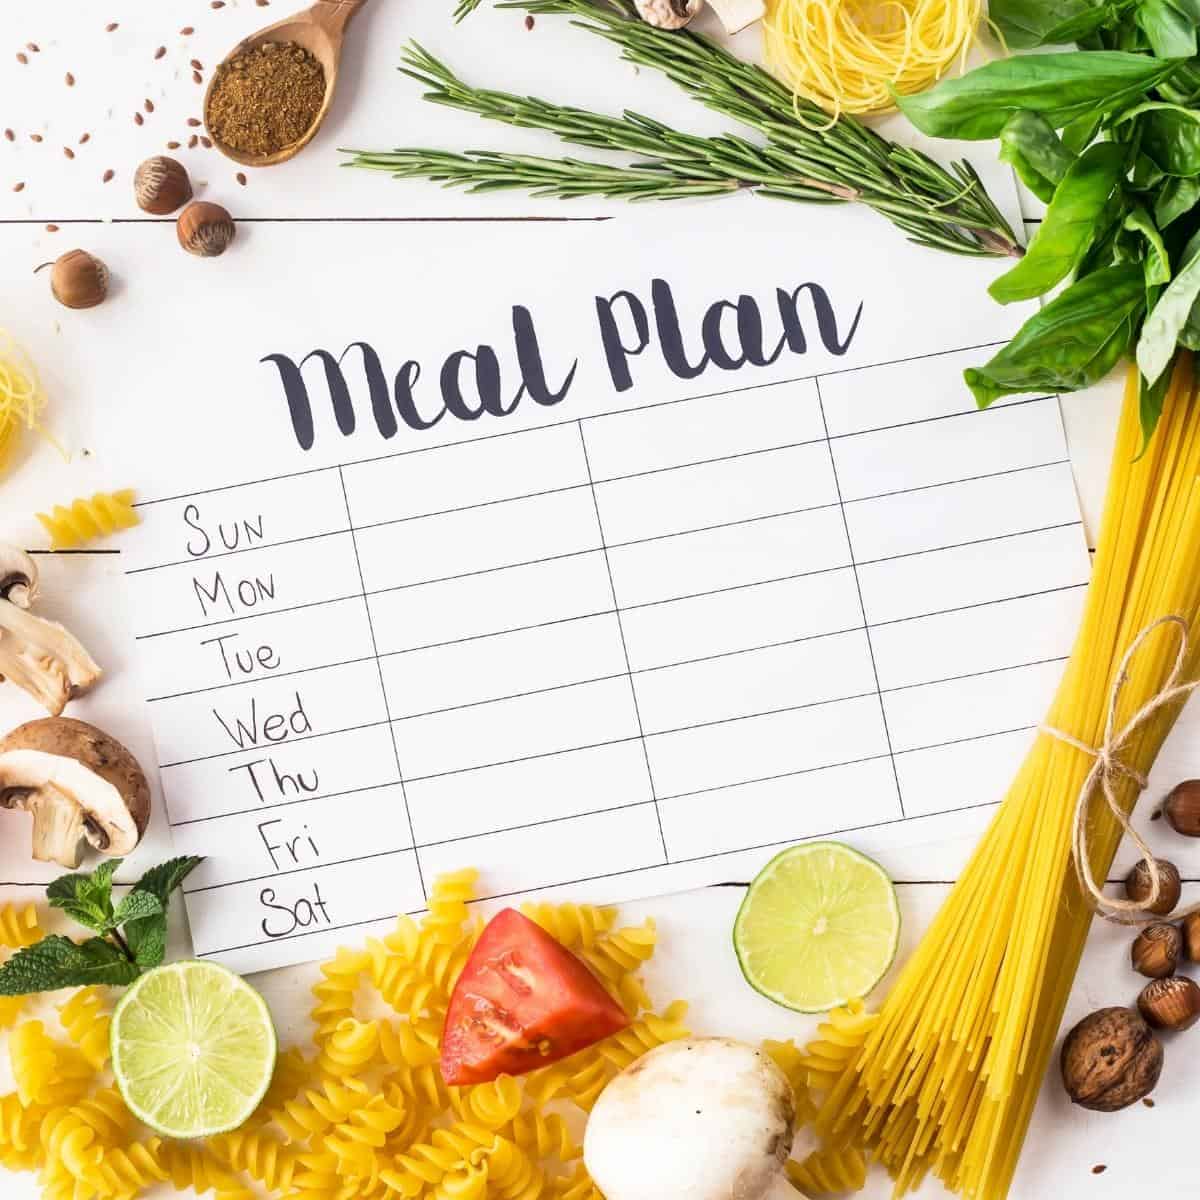 5 top tips to make a perfect meal plan